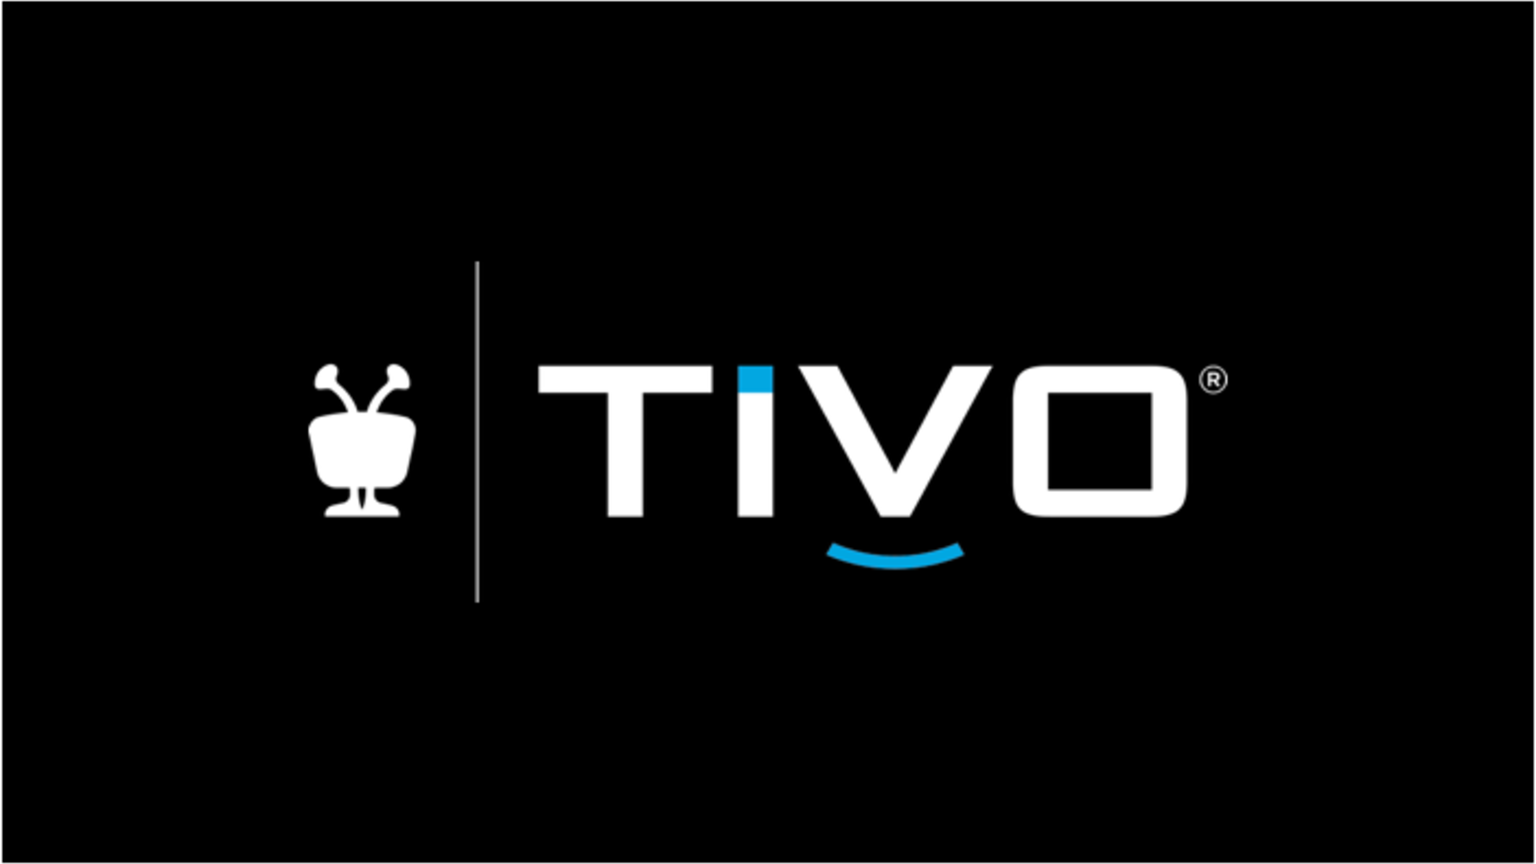 Amazon Prime Video App Now Available For Tivo Pay Tv Customers The Streamable